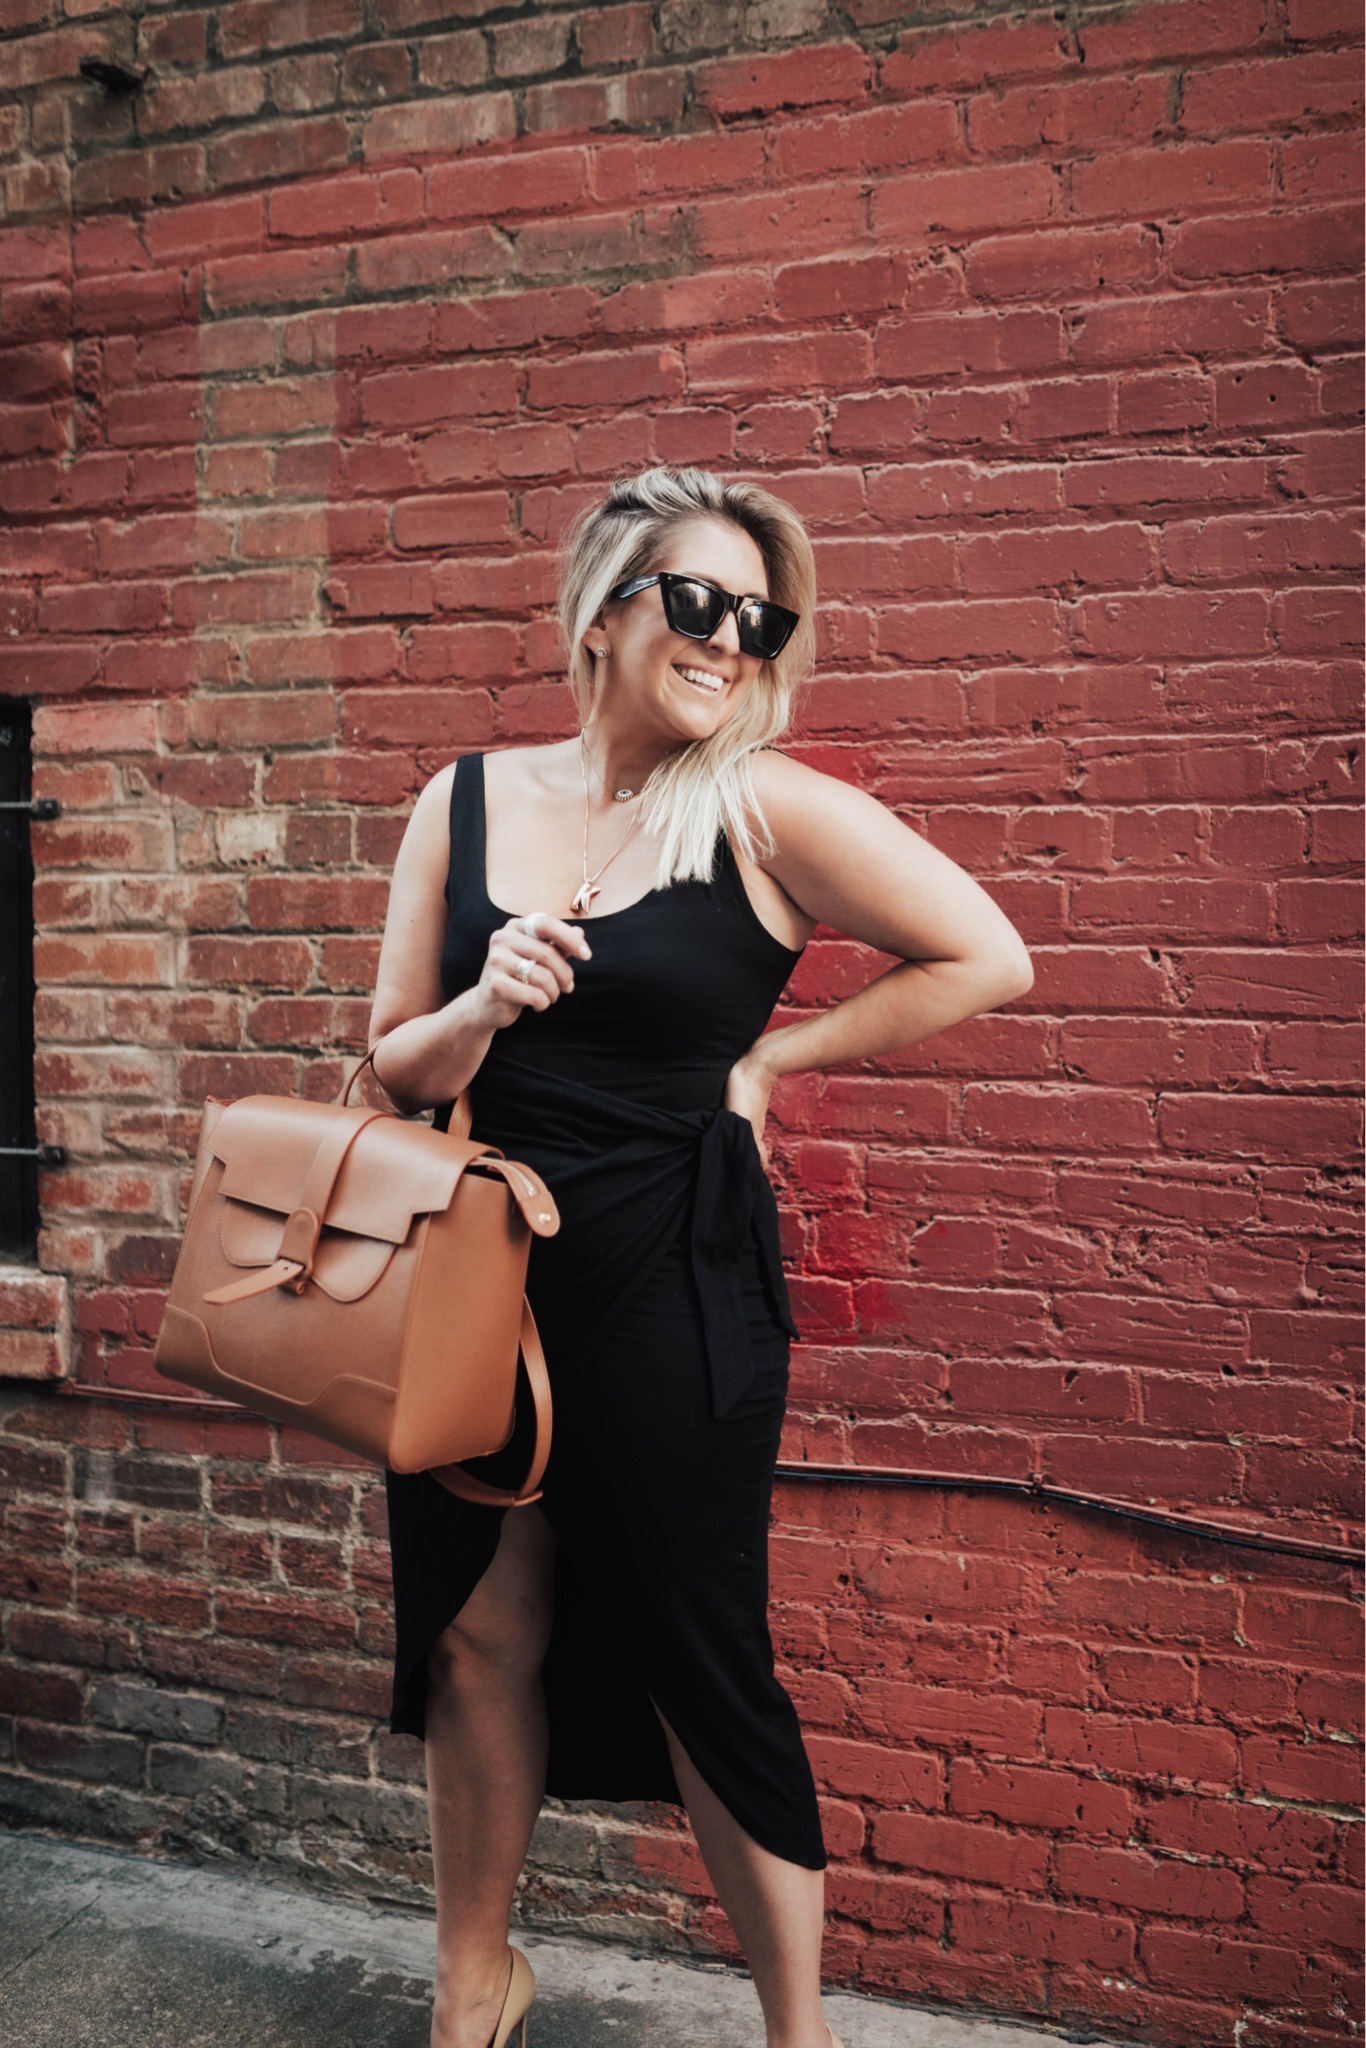 Fashion and Curvy Blogger KatWalkSF wears the Reformation Kaila Wrap Style Jersey Dress